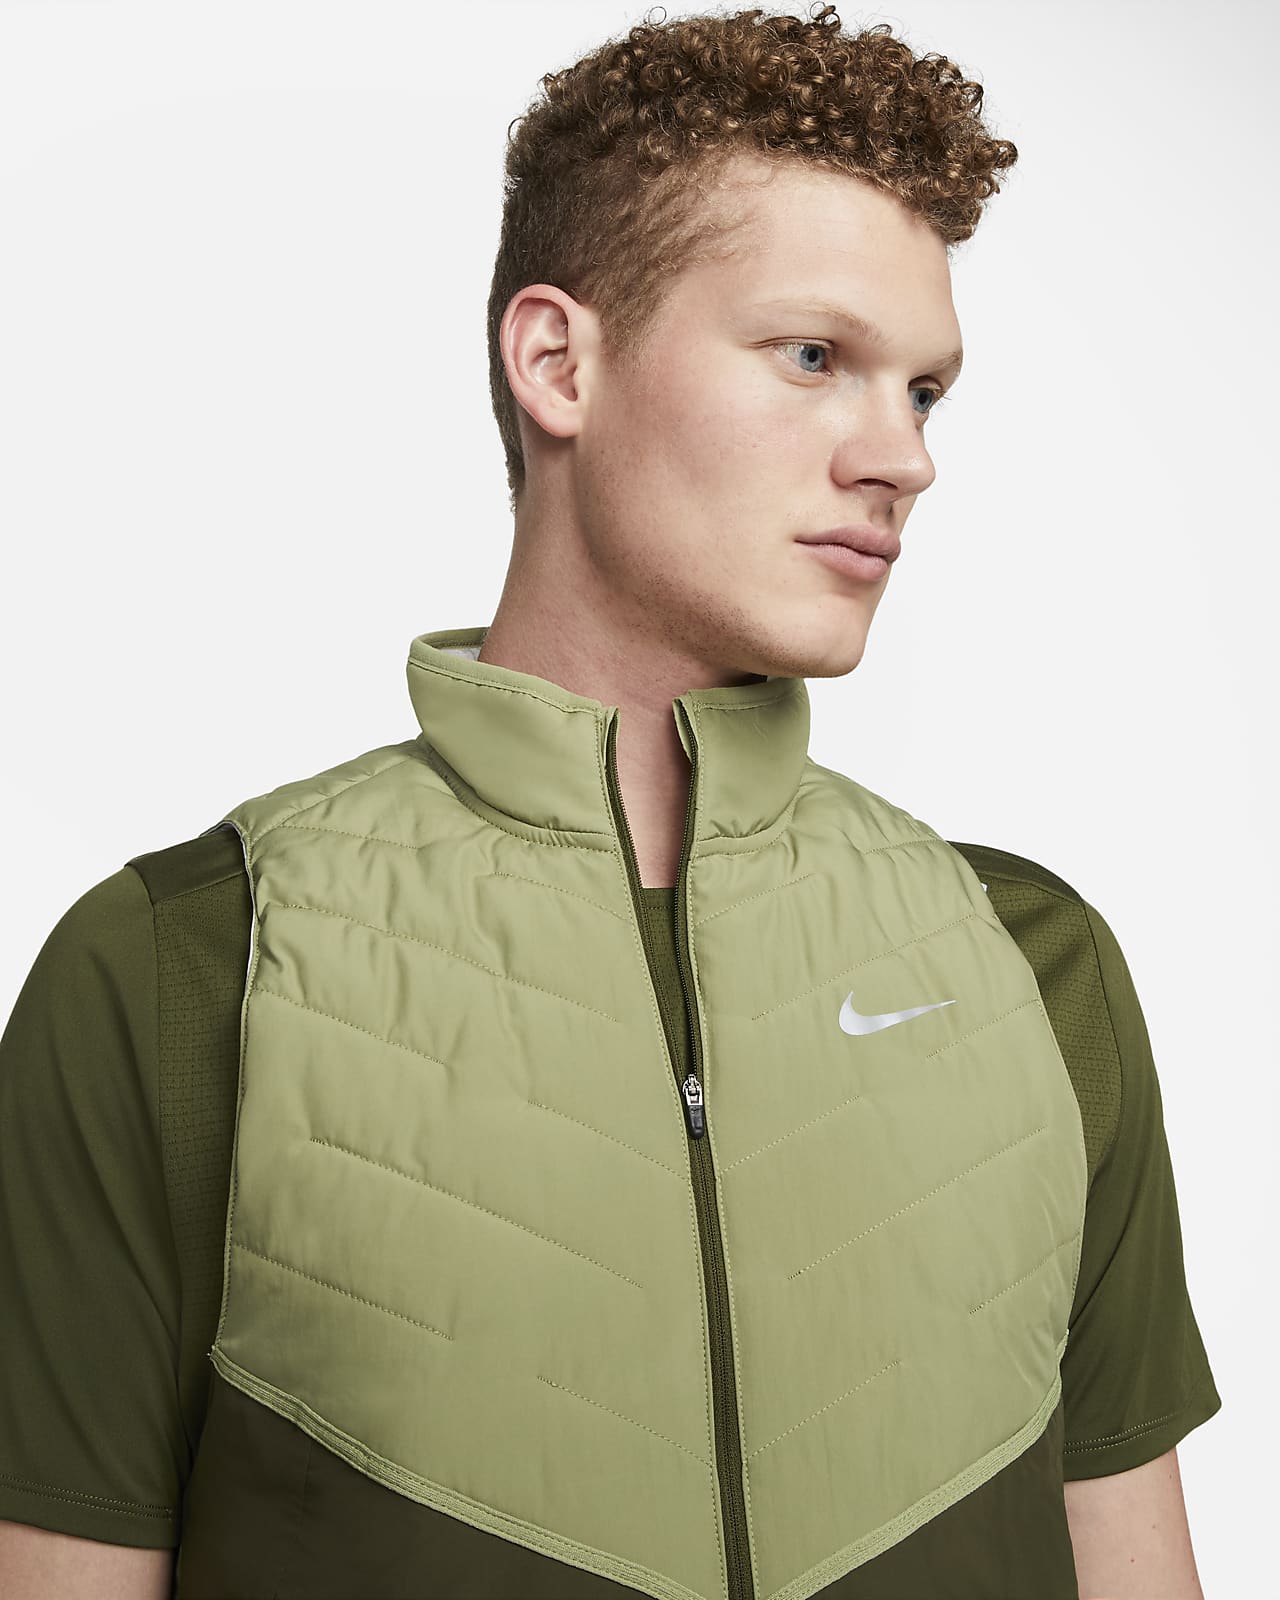 Nike Running - Repel Quilted Therma-FIT Gilet - Black Nike Running